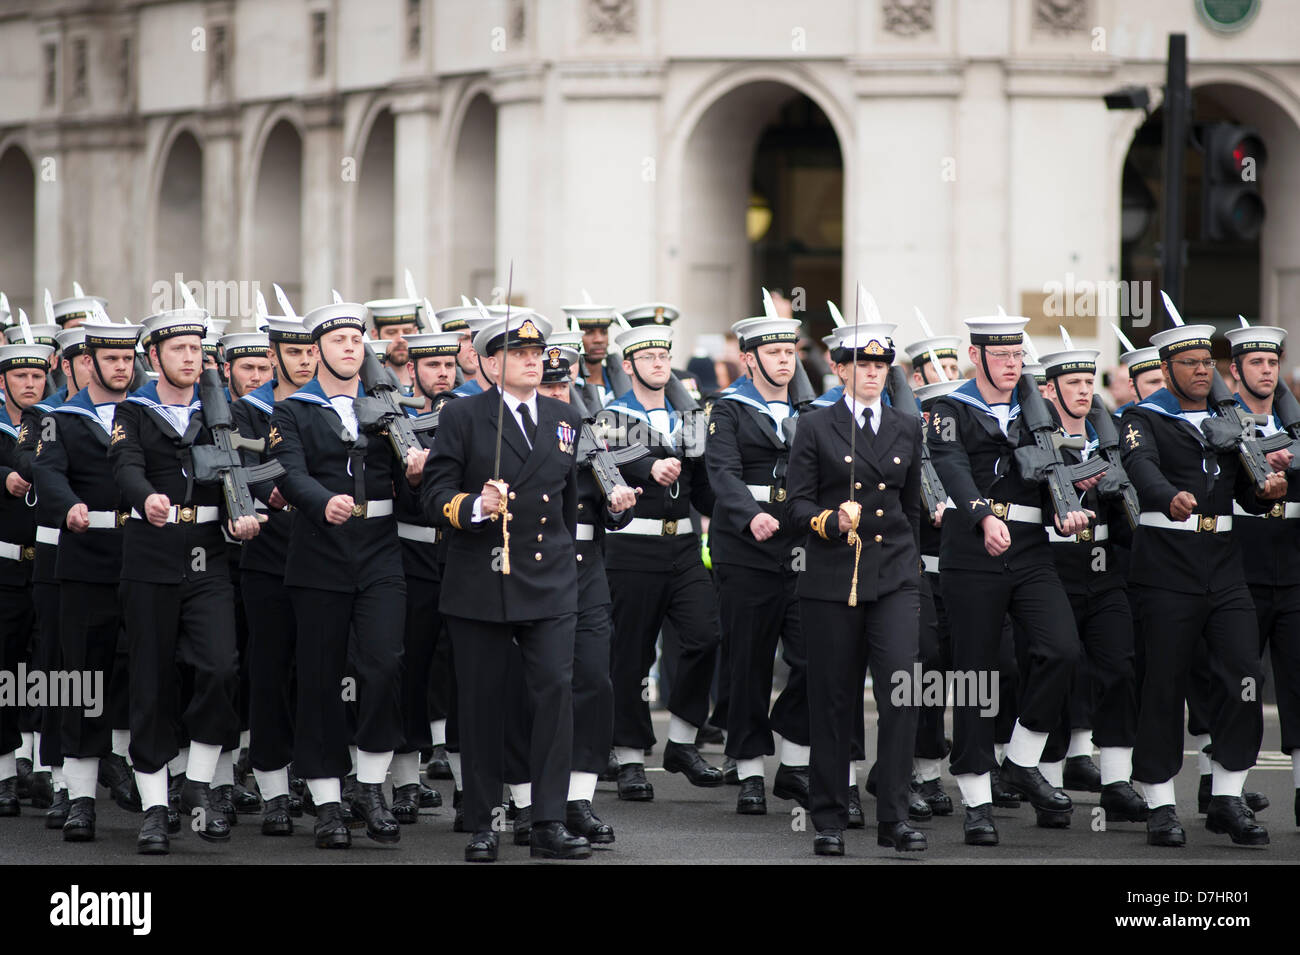 London, UK. 8th May 2013. Royal Navy parade enters Parliament Square, Westminster, prior to the state opening of Parliament in central London, England. Credit:  Malcolm Park London events / Alamy Live News Stock Photo